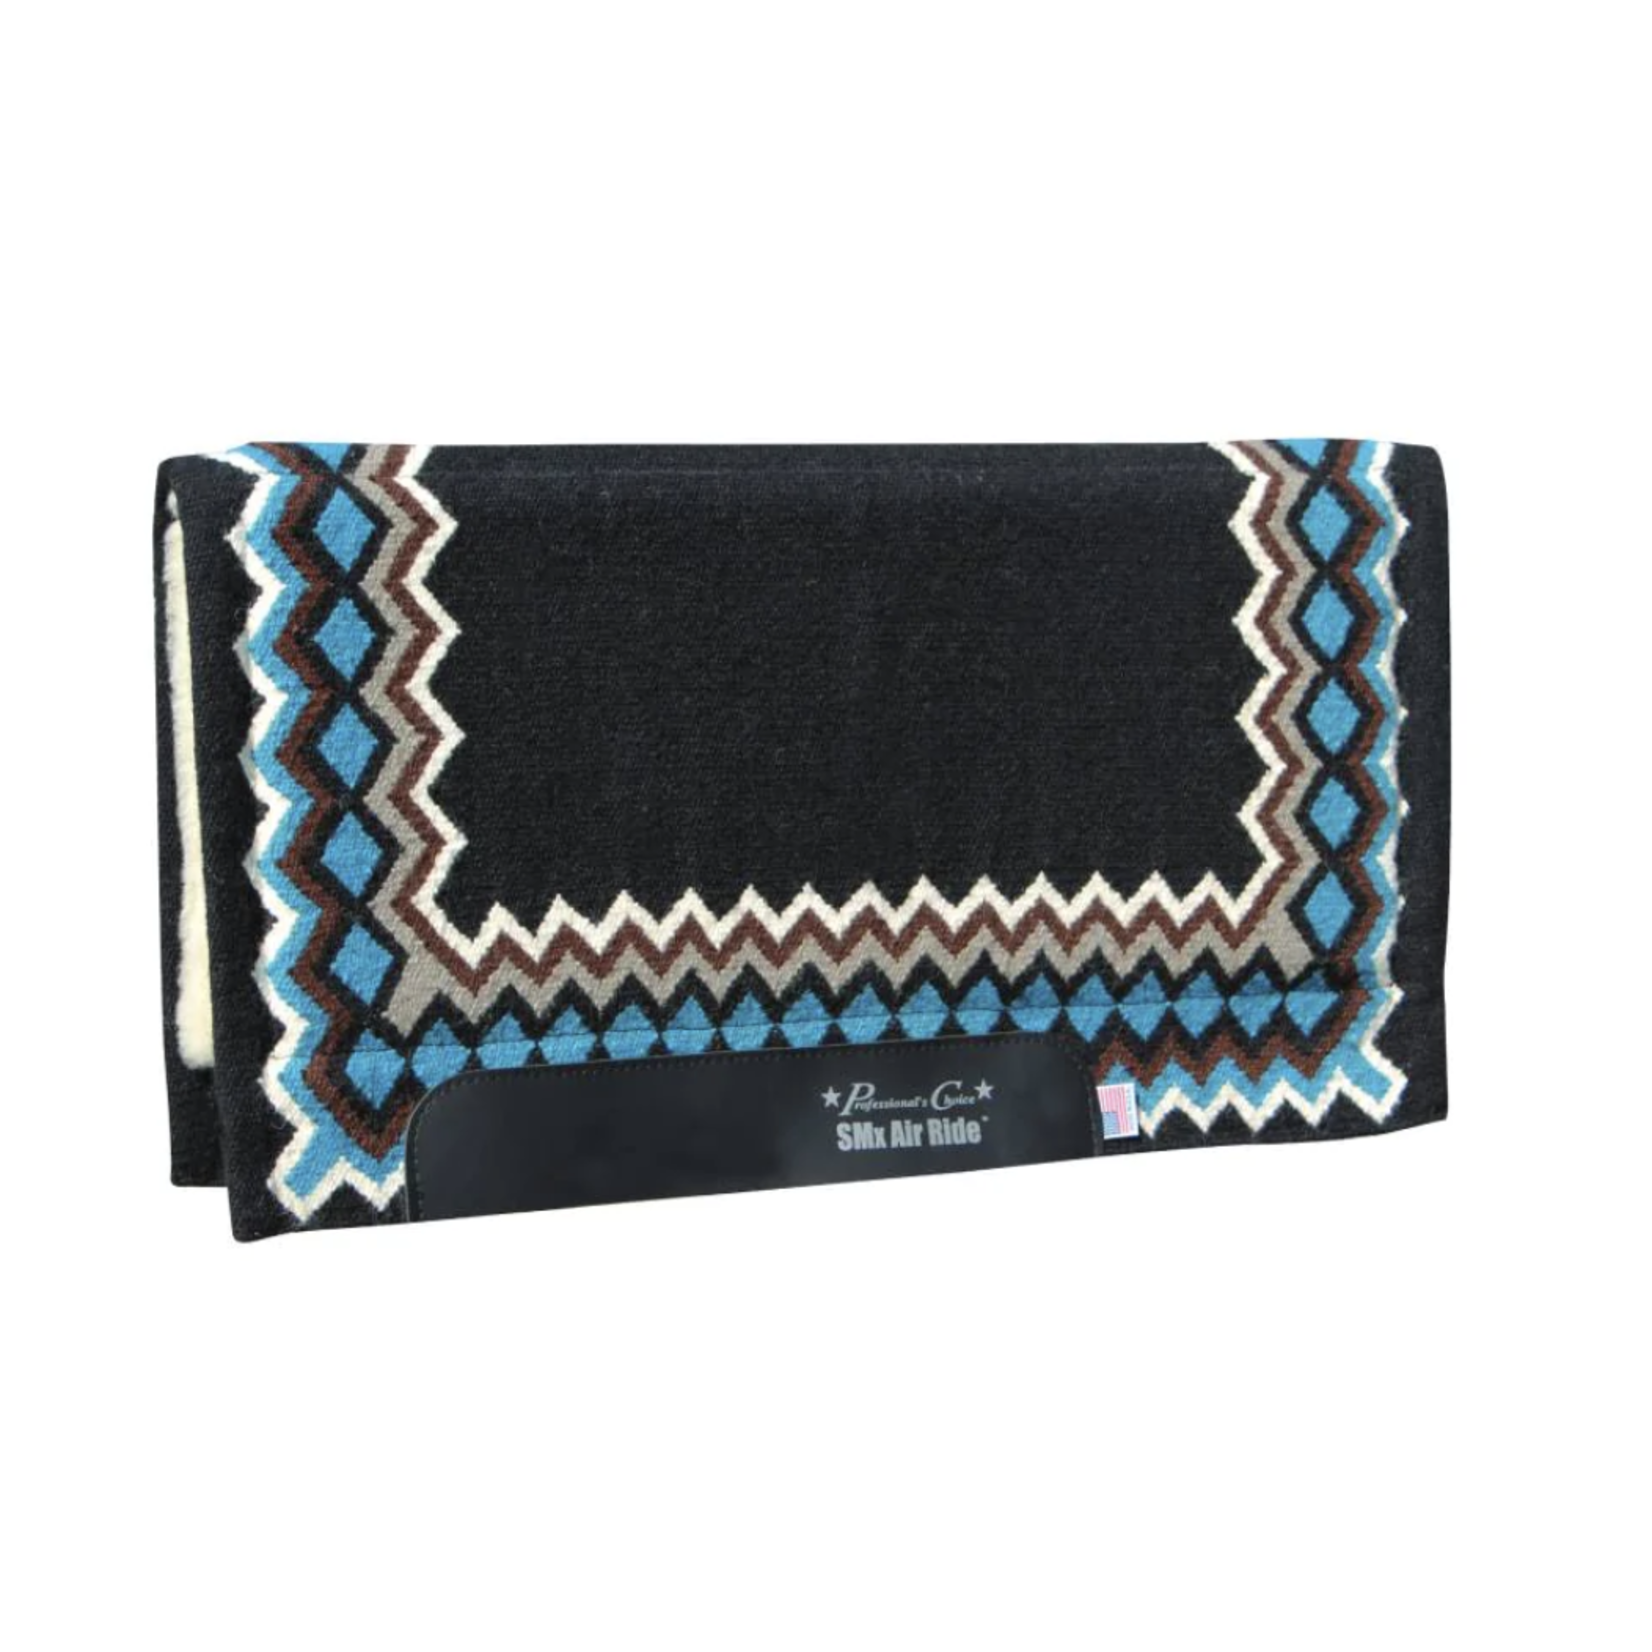 Professional's Choice SMx H.D. Air Ride Saddle Pad